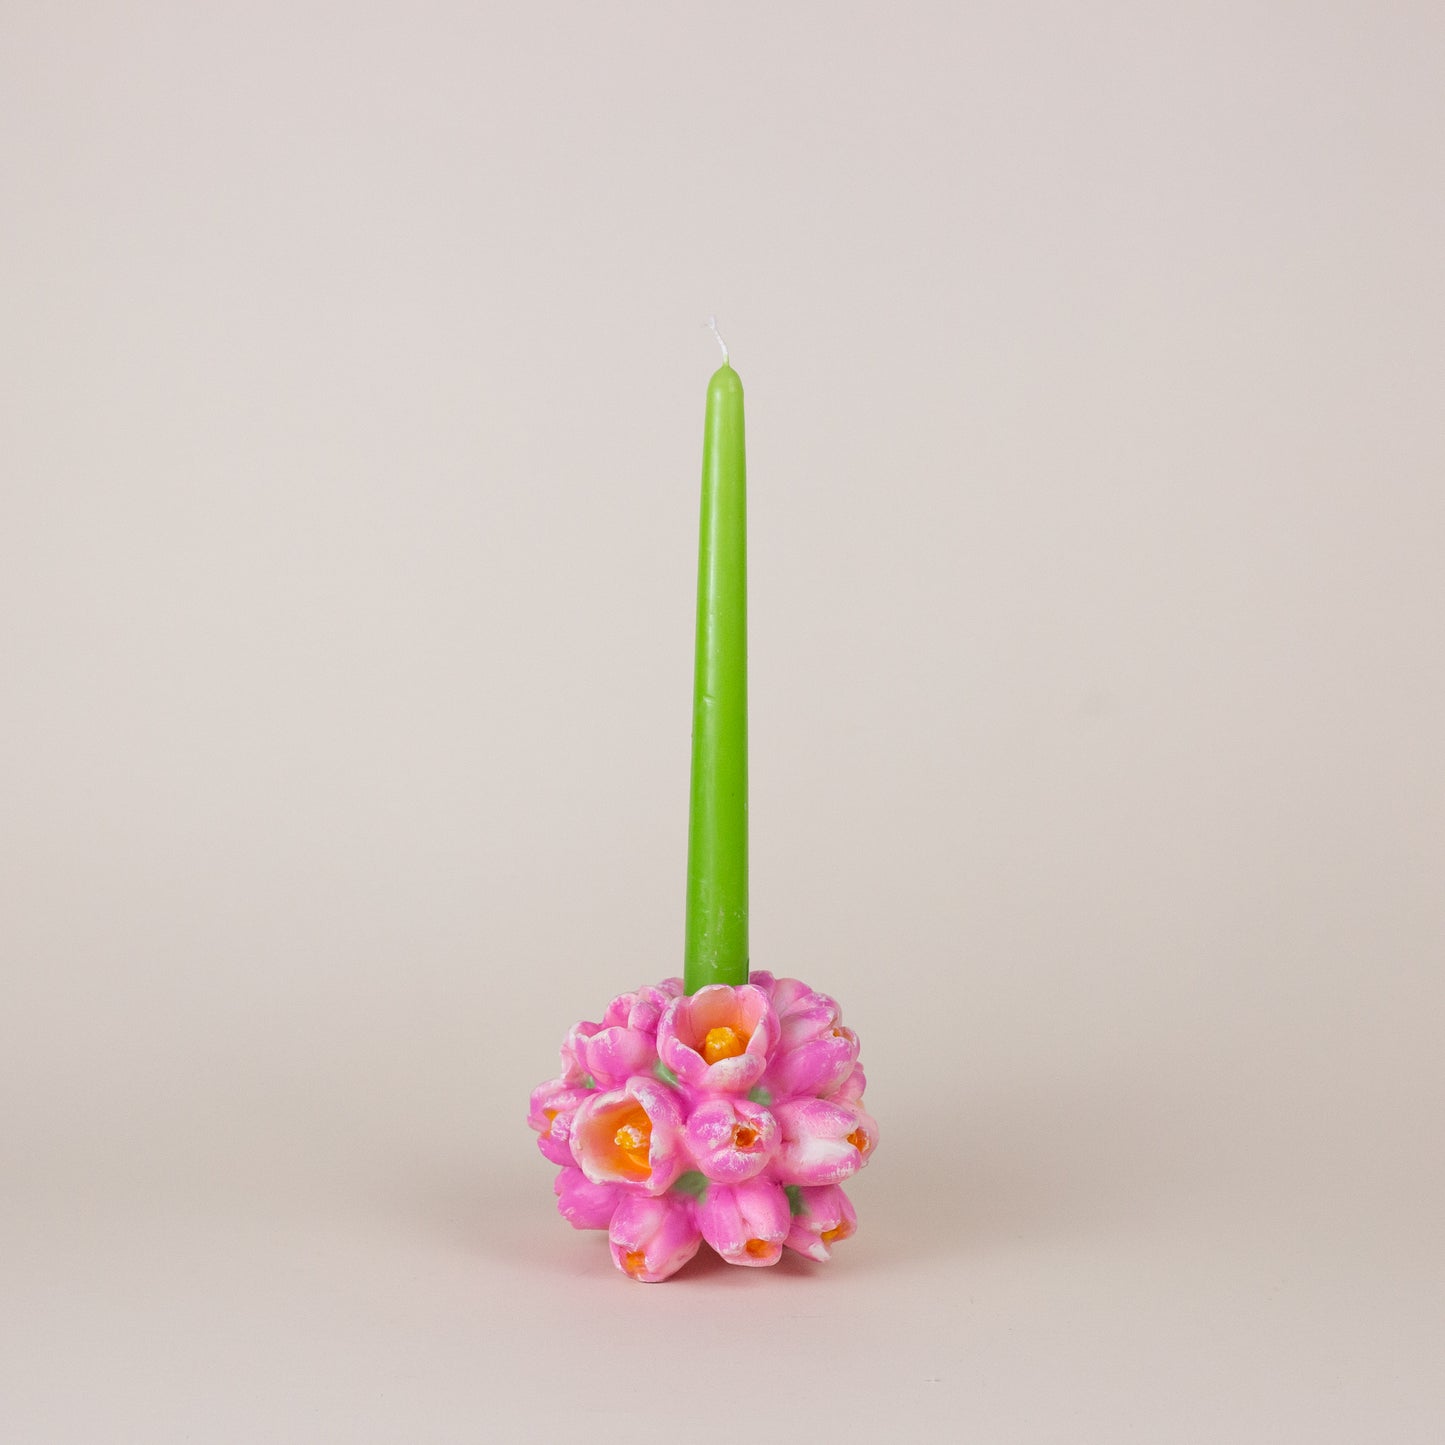 Flower Candle